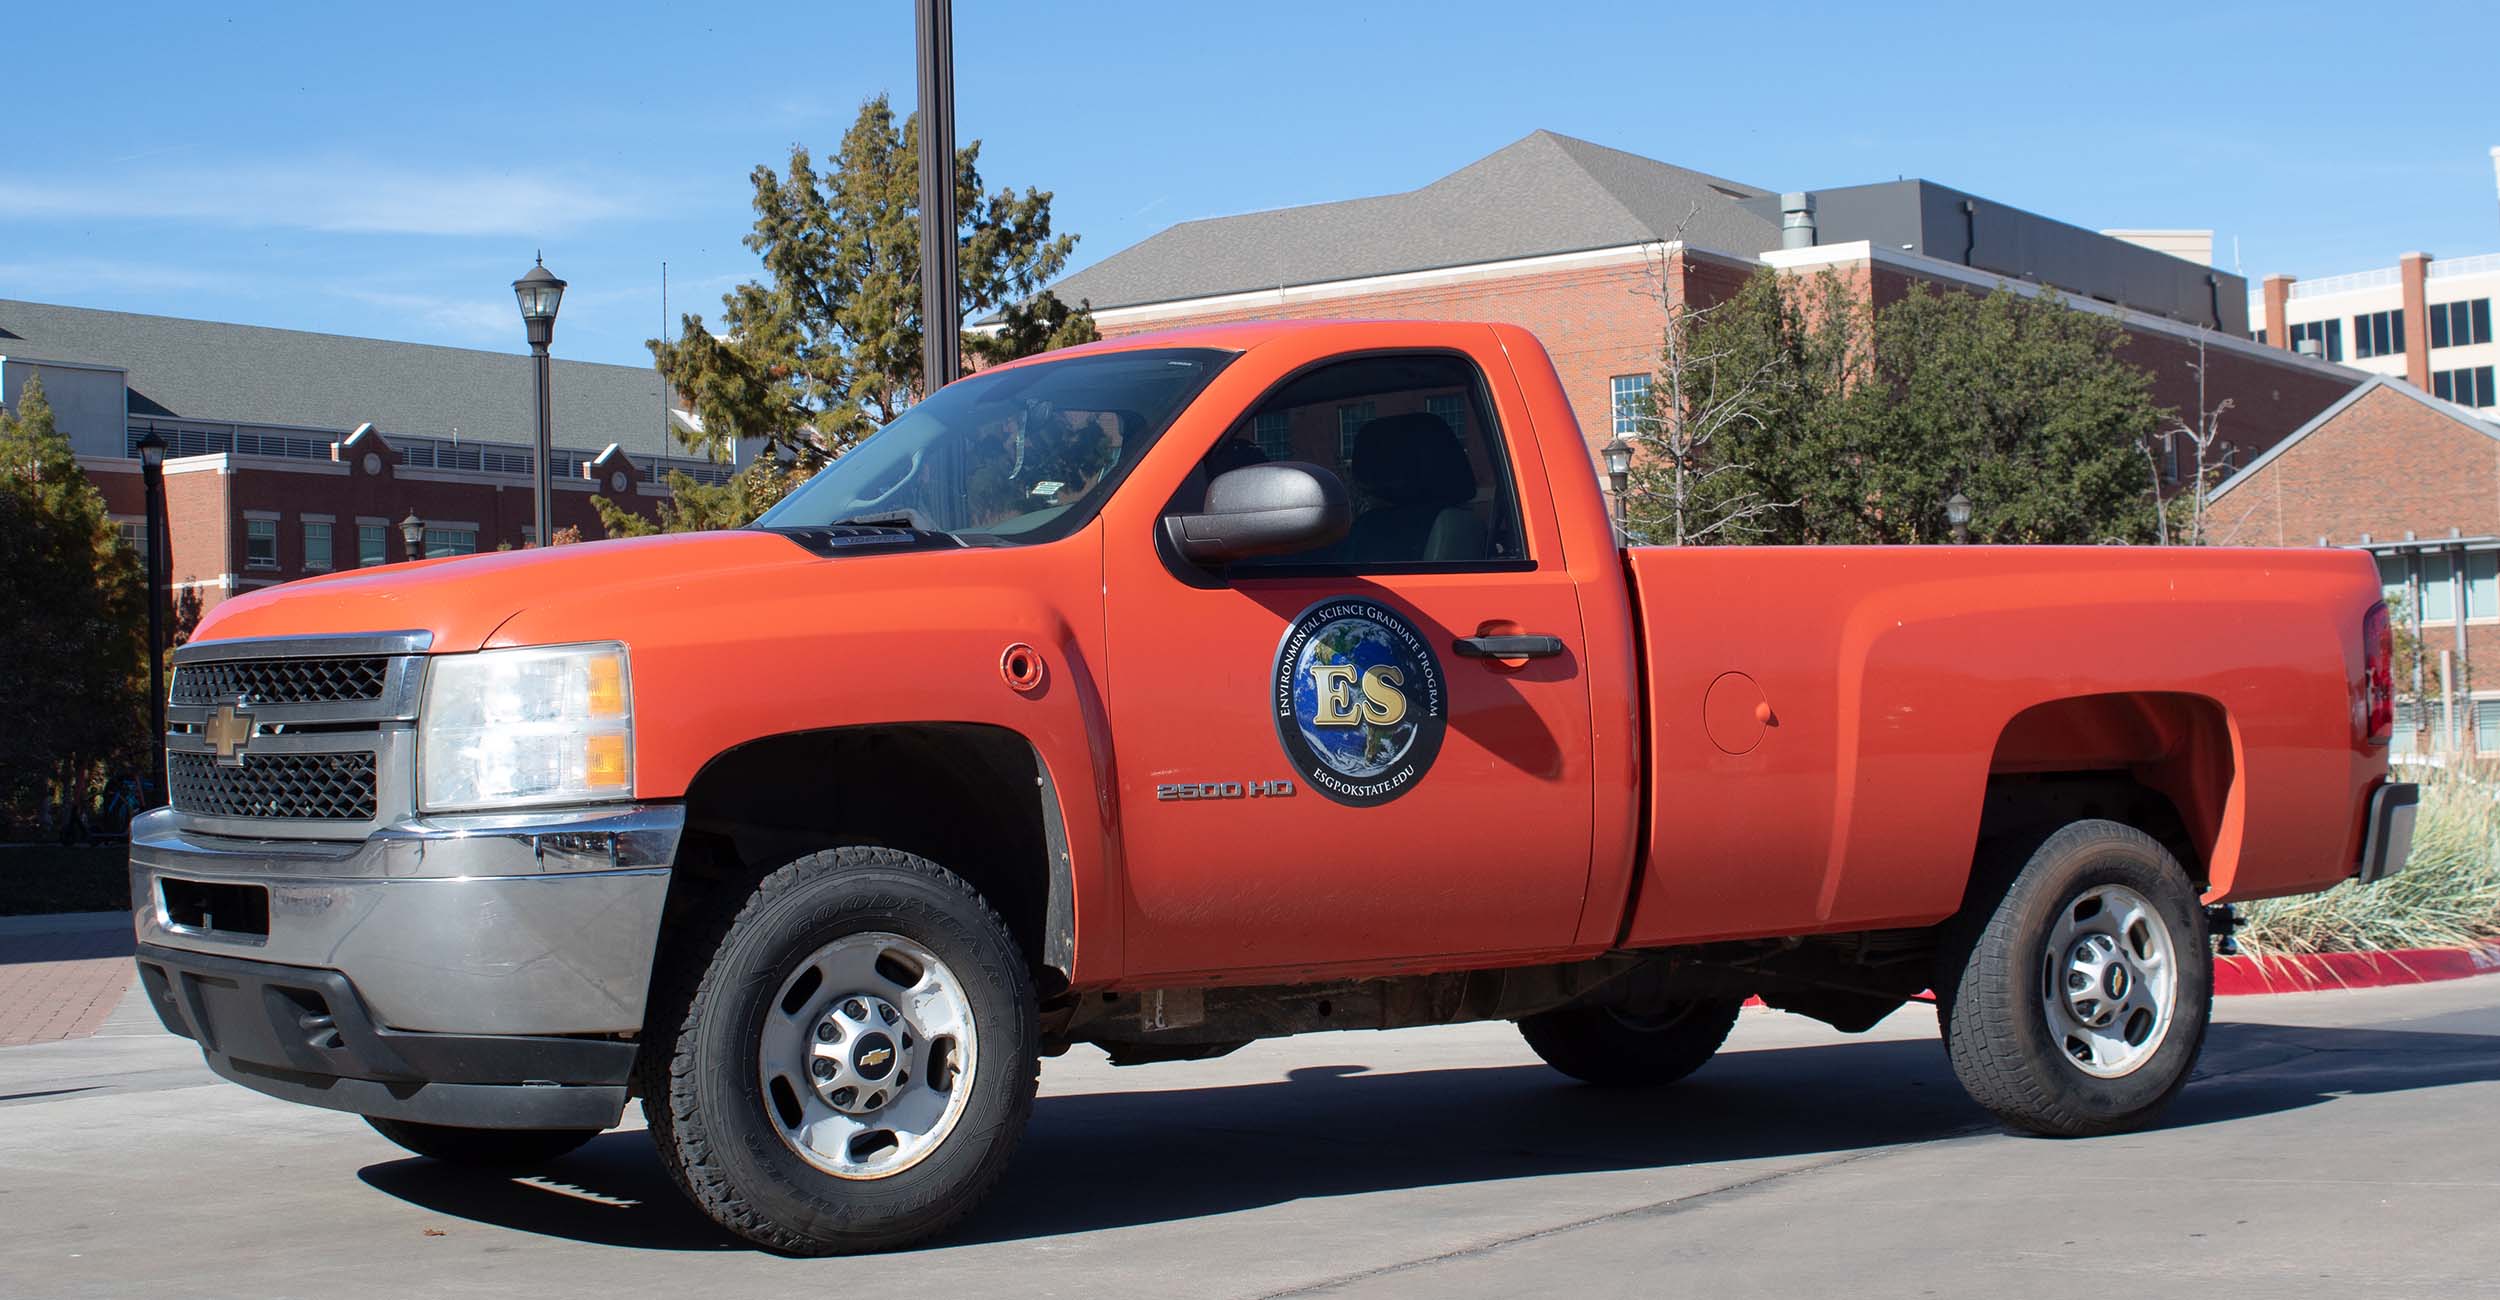 A truck donated by OG&E to OSU.